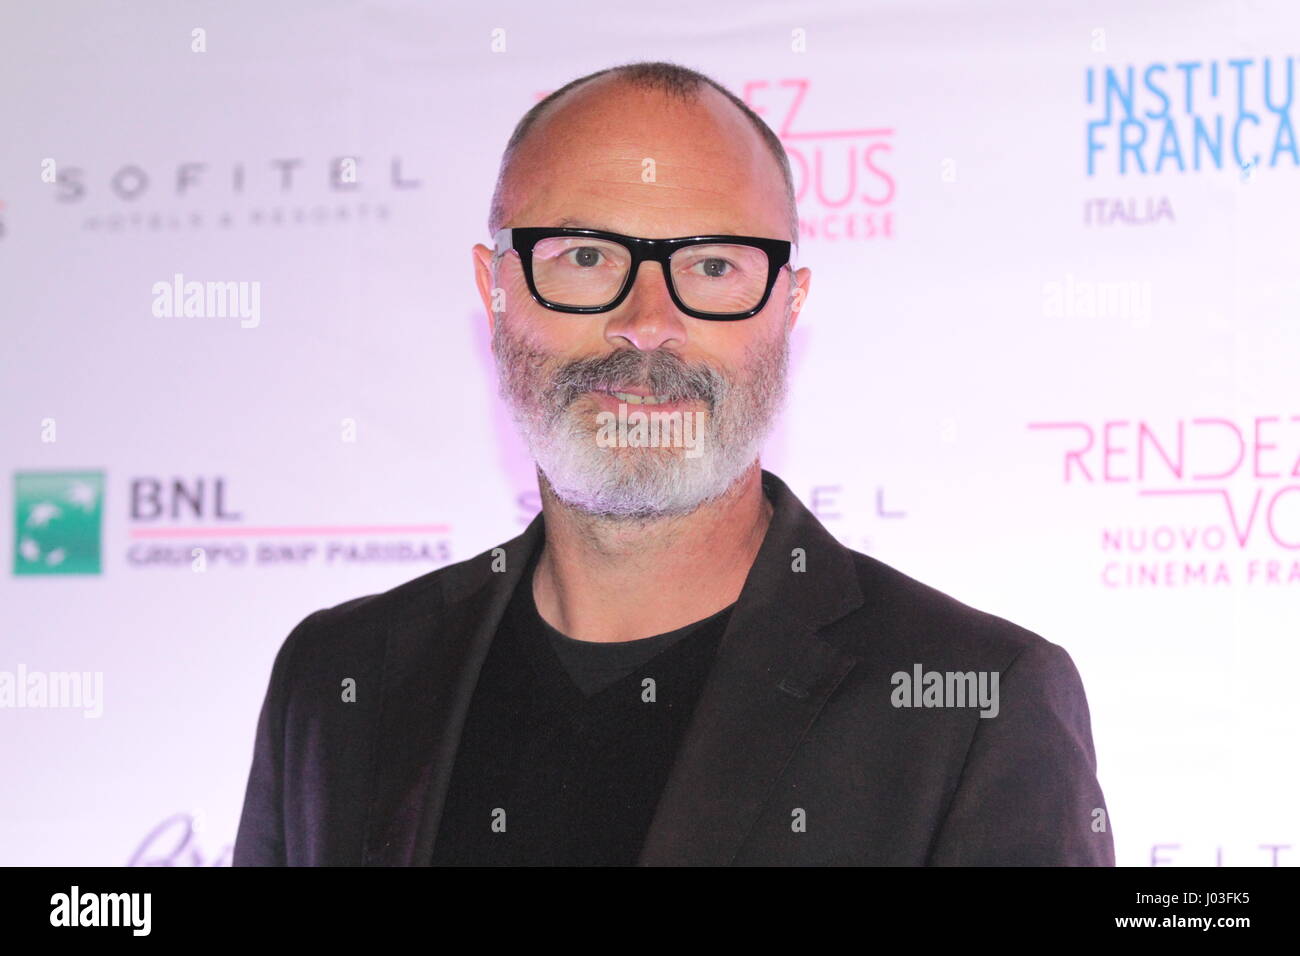 Ivano De Matteo at the red carpet presentation of ‘Rendez-vous' Cinema French in Farnese Palace, Rome. (Photo by: Aurora Leone/Pacific Press) Stock Photo